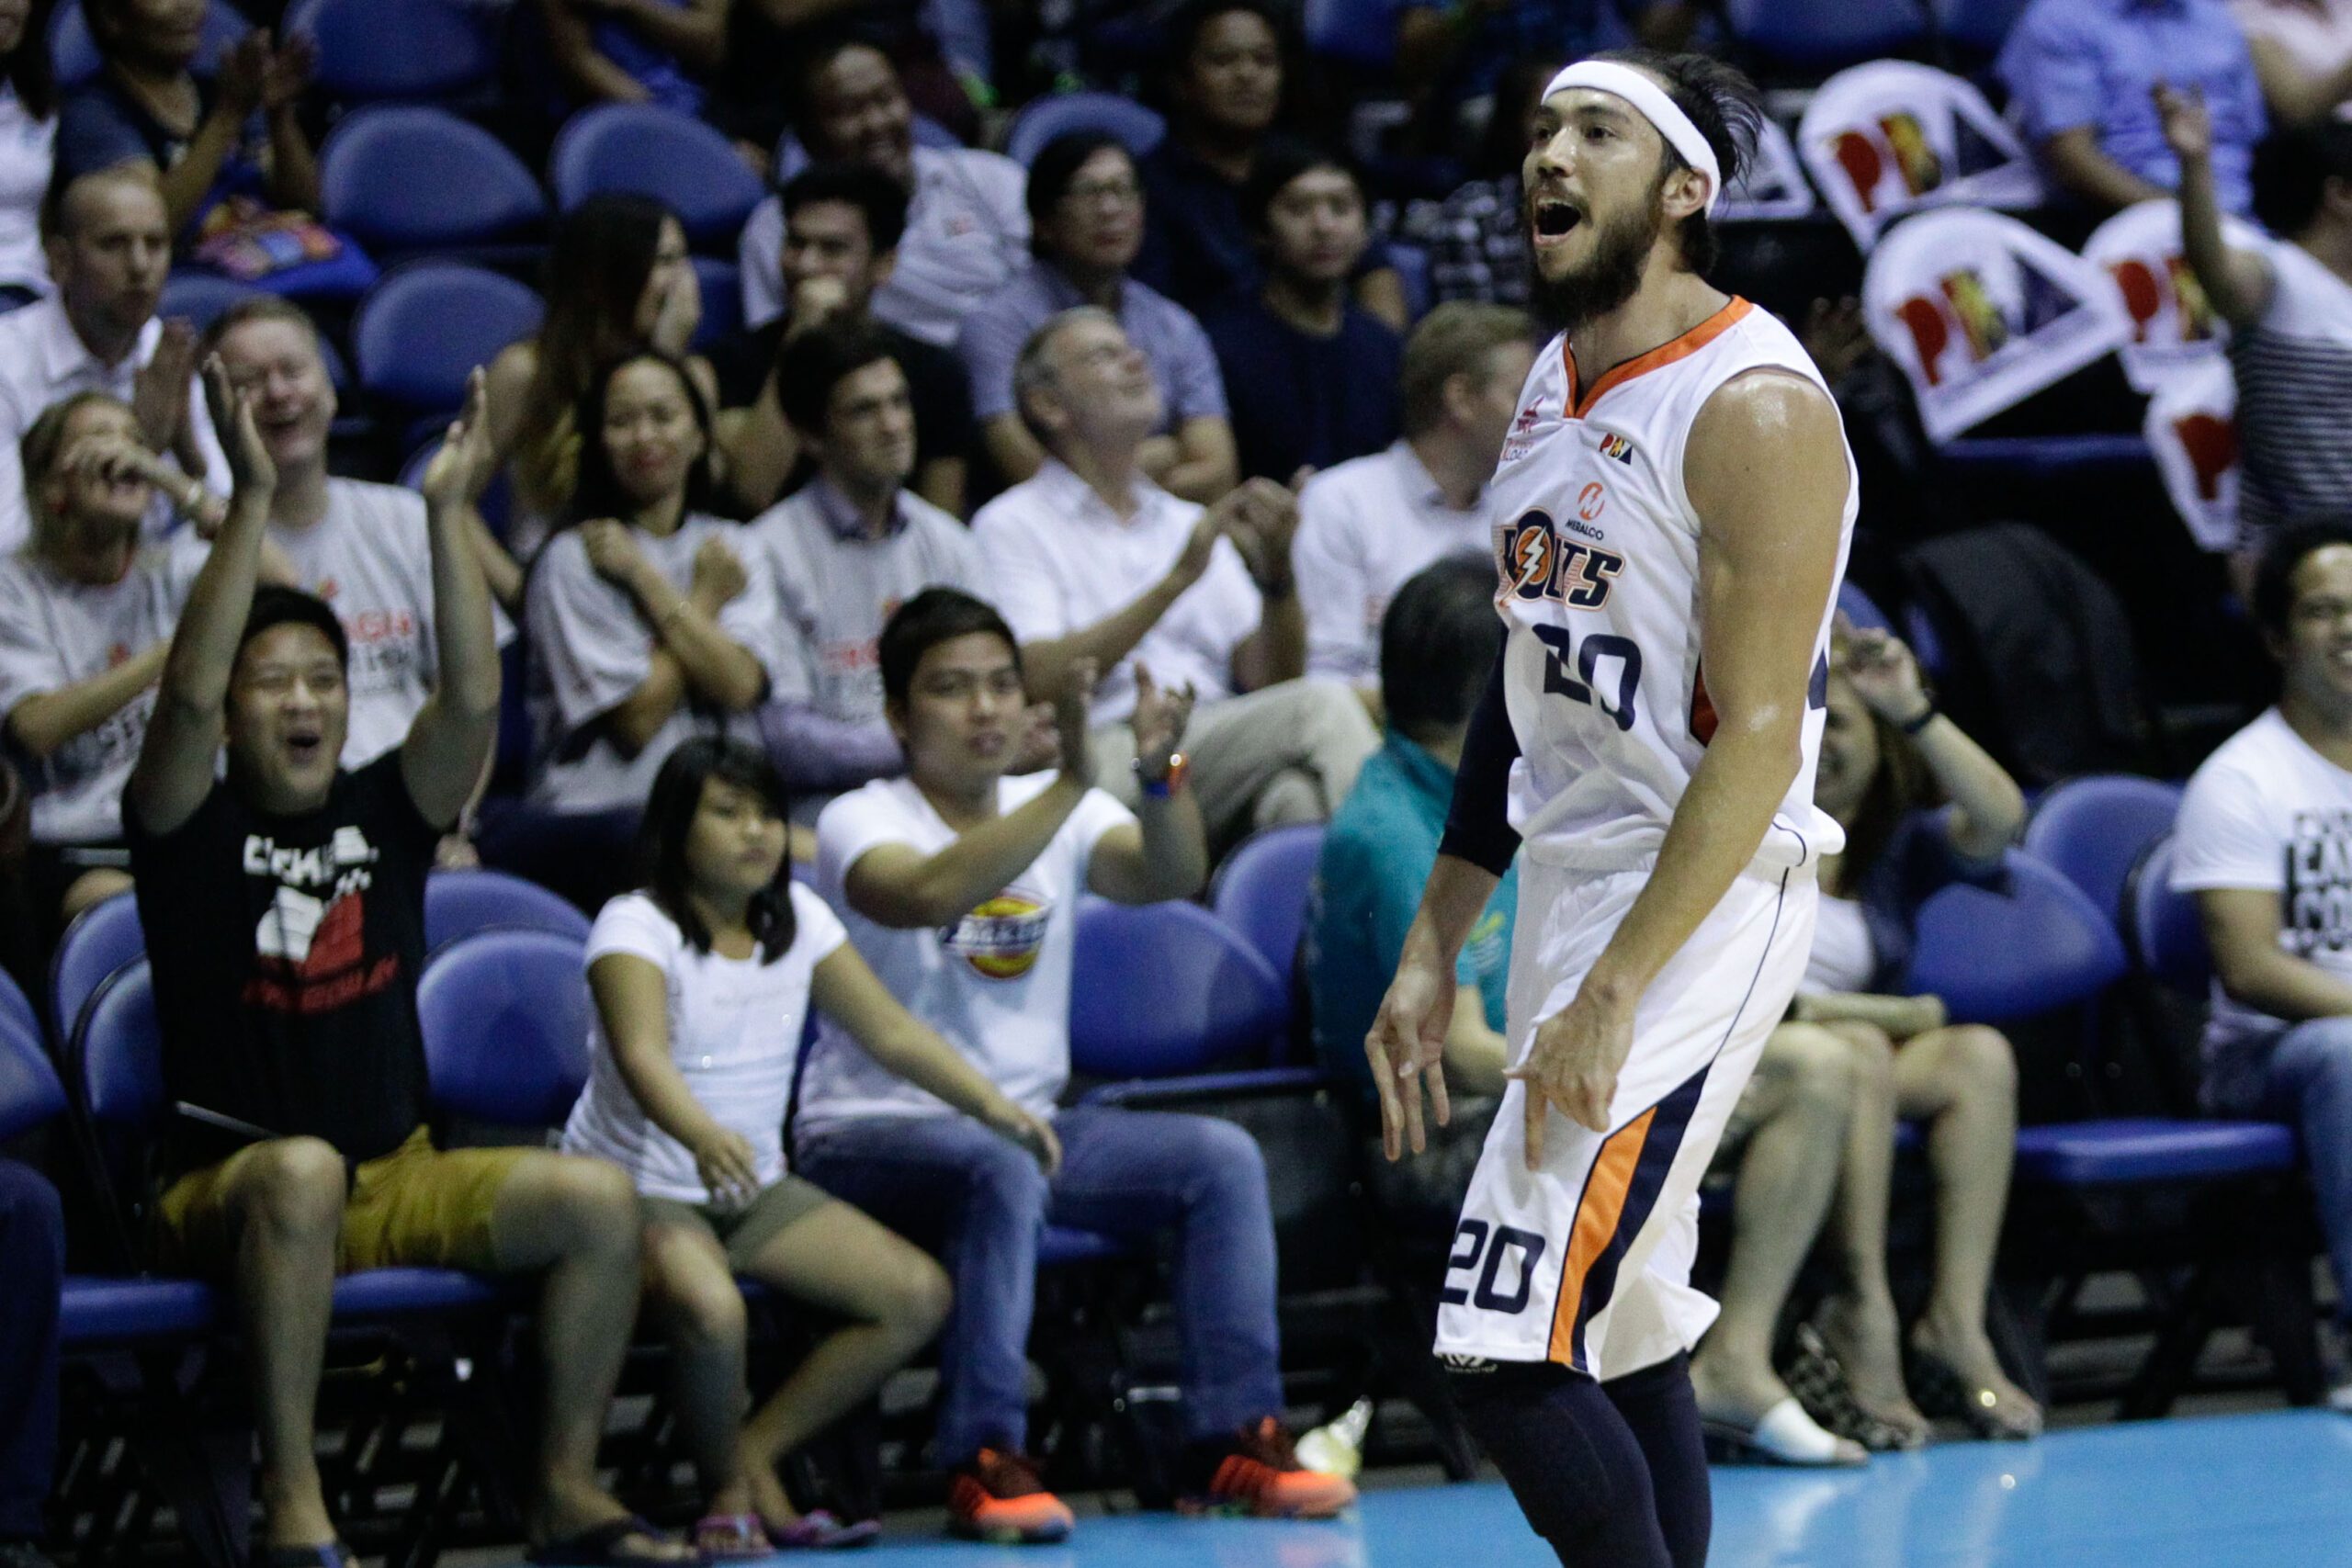 Meralco routs Alaska to force deciding Game 5